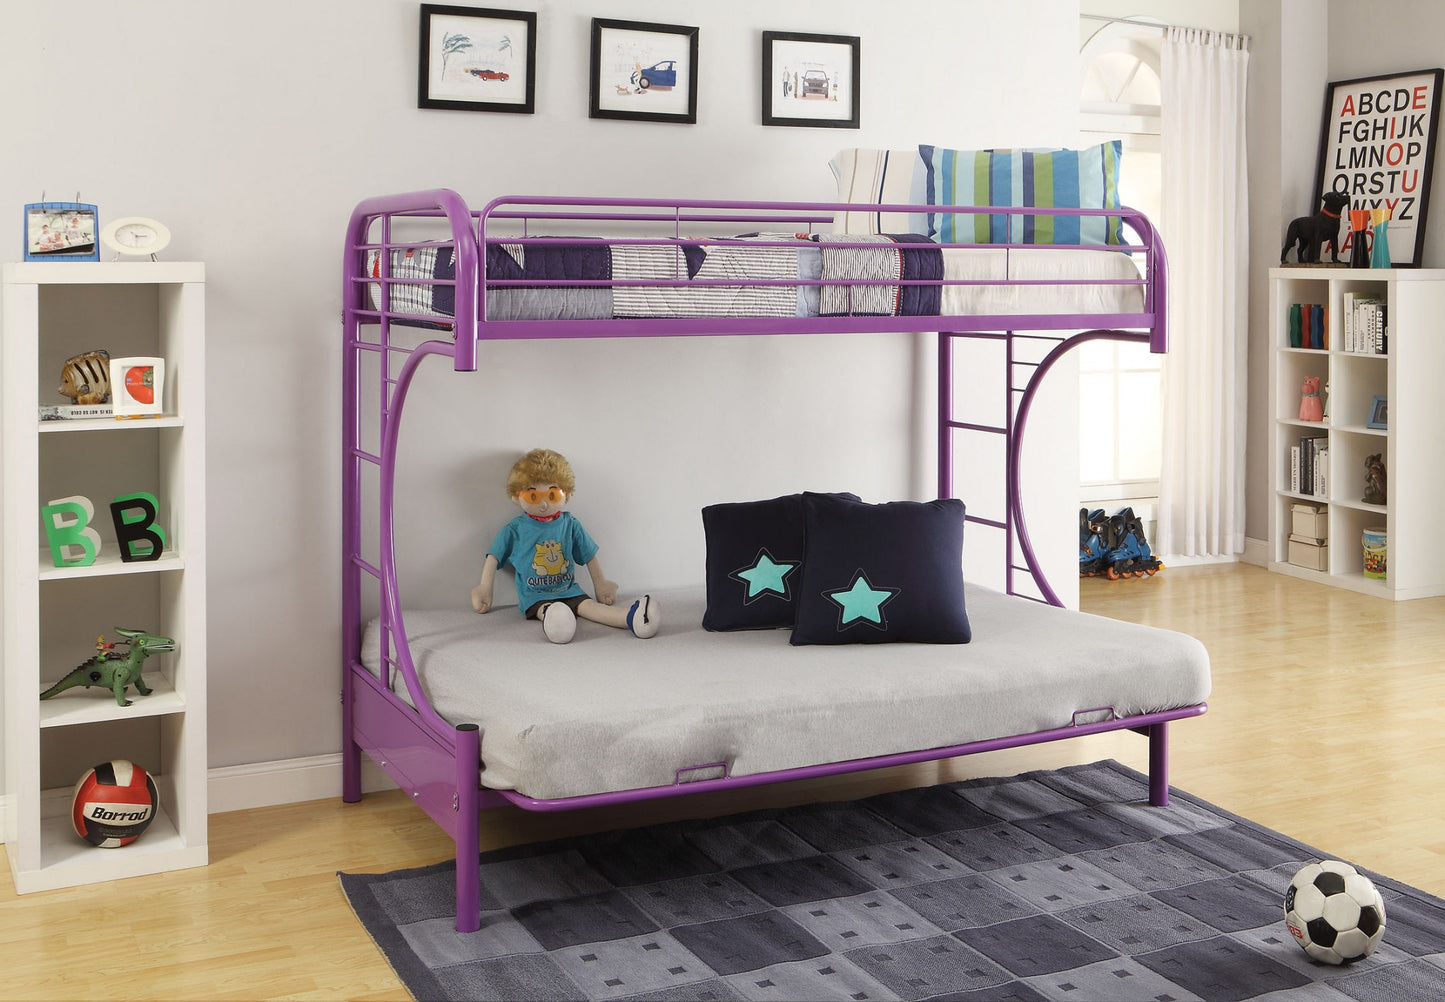 Navy Full Contemporary Metal Bunk Bed